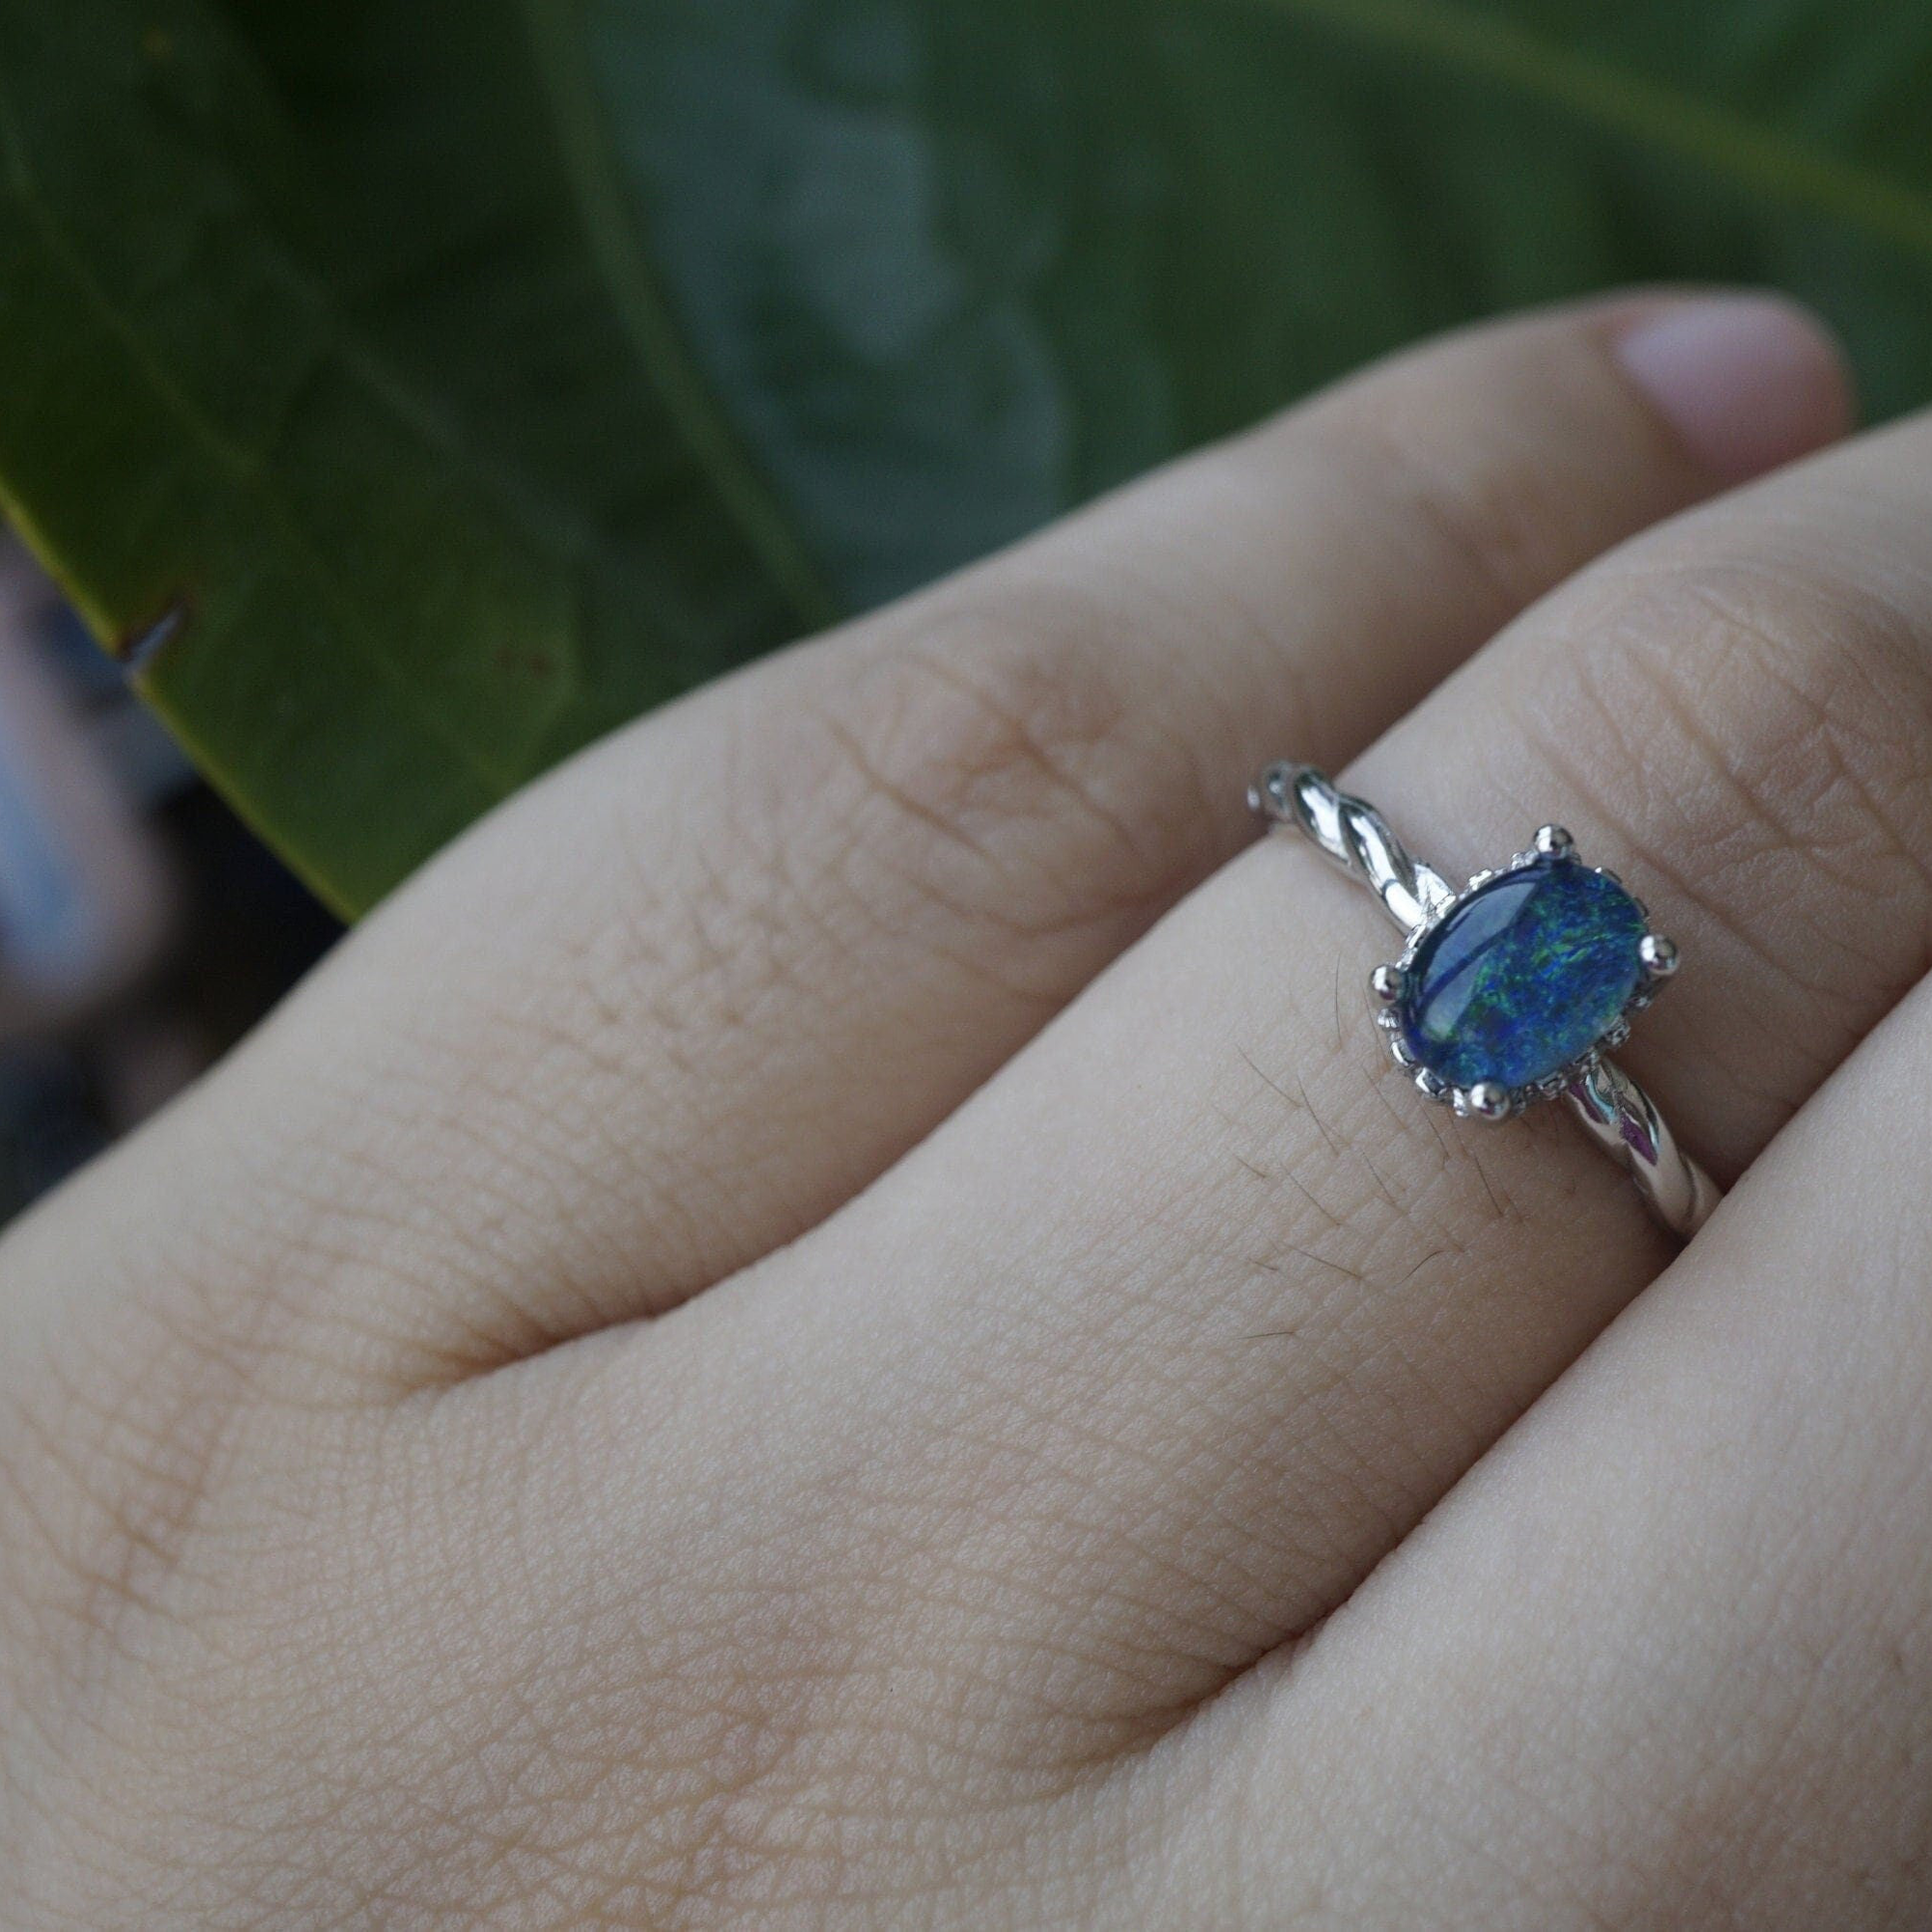 Simple silver opal ring | australian opal triplet ring | solitaire and minimalist style opal ring for your engagement-Vsabel Jewellery